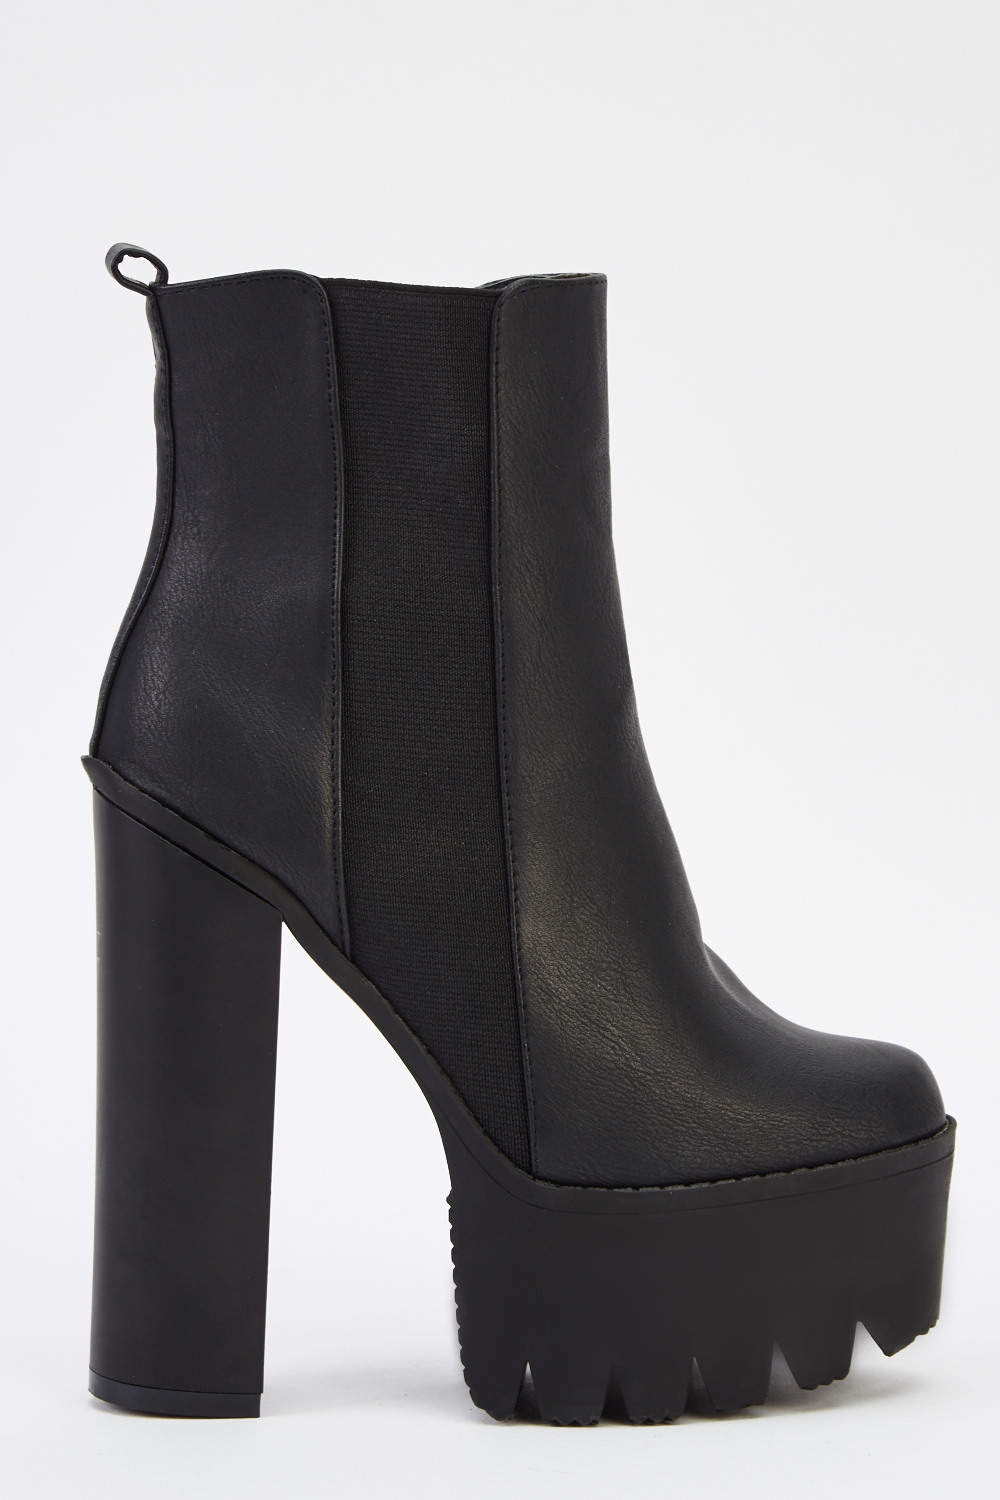 Black Chunky Heeled Boots - Just $7